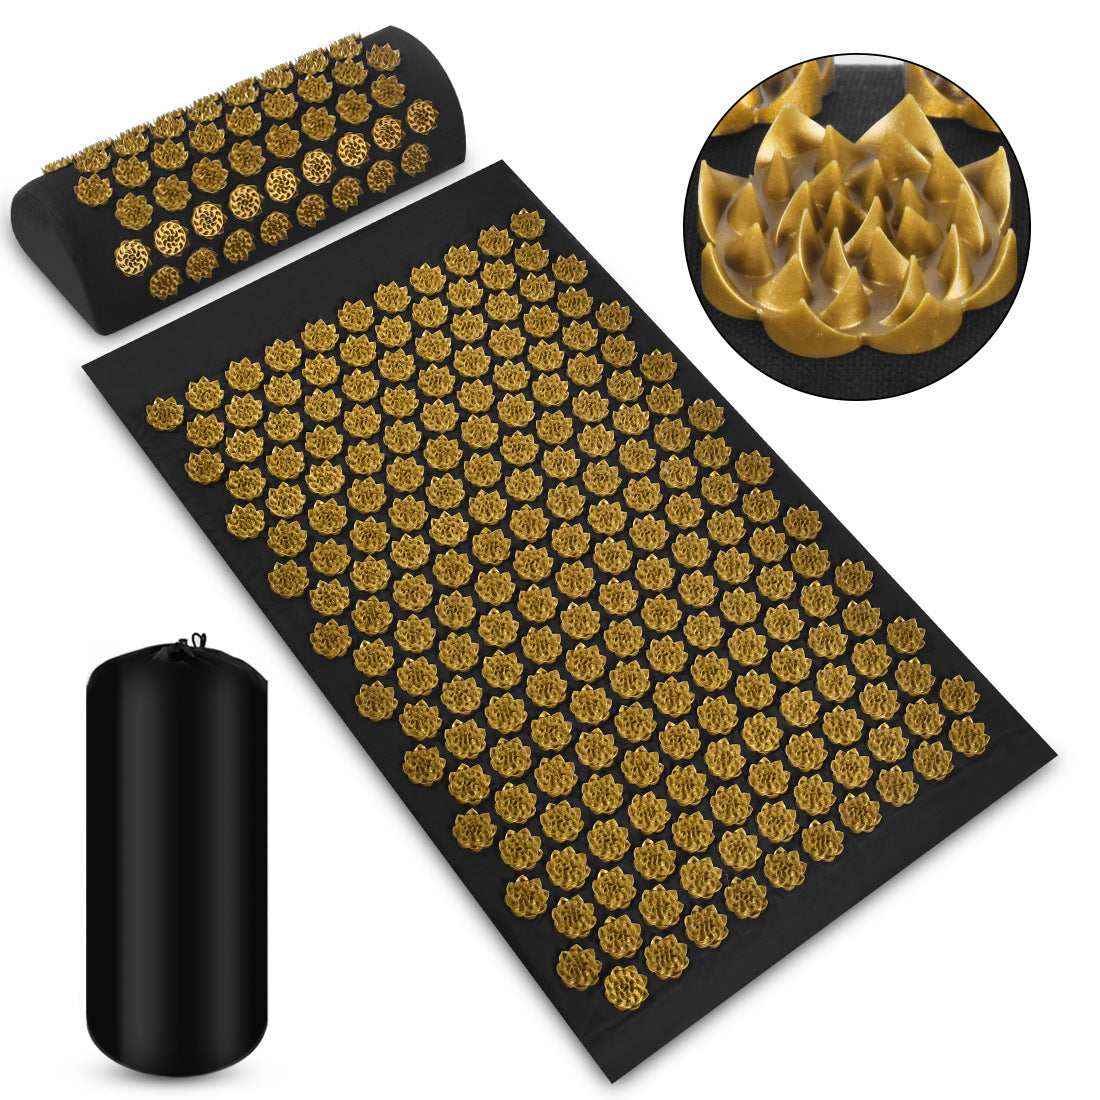 Acupressure Mat - home • office • health - black and gold mat, set comes with mat, pillow, and black carrying bag, acupressure, acupuncture, pain relief mat